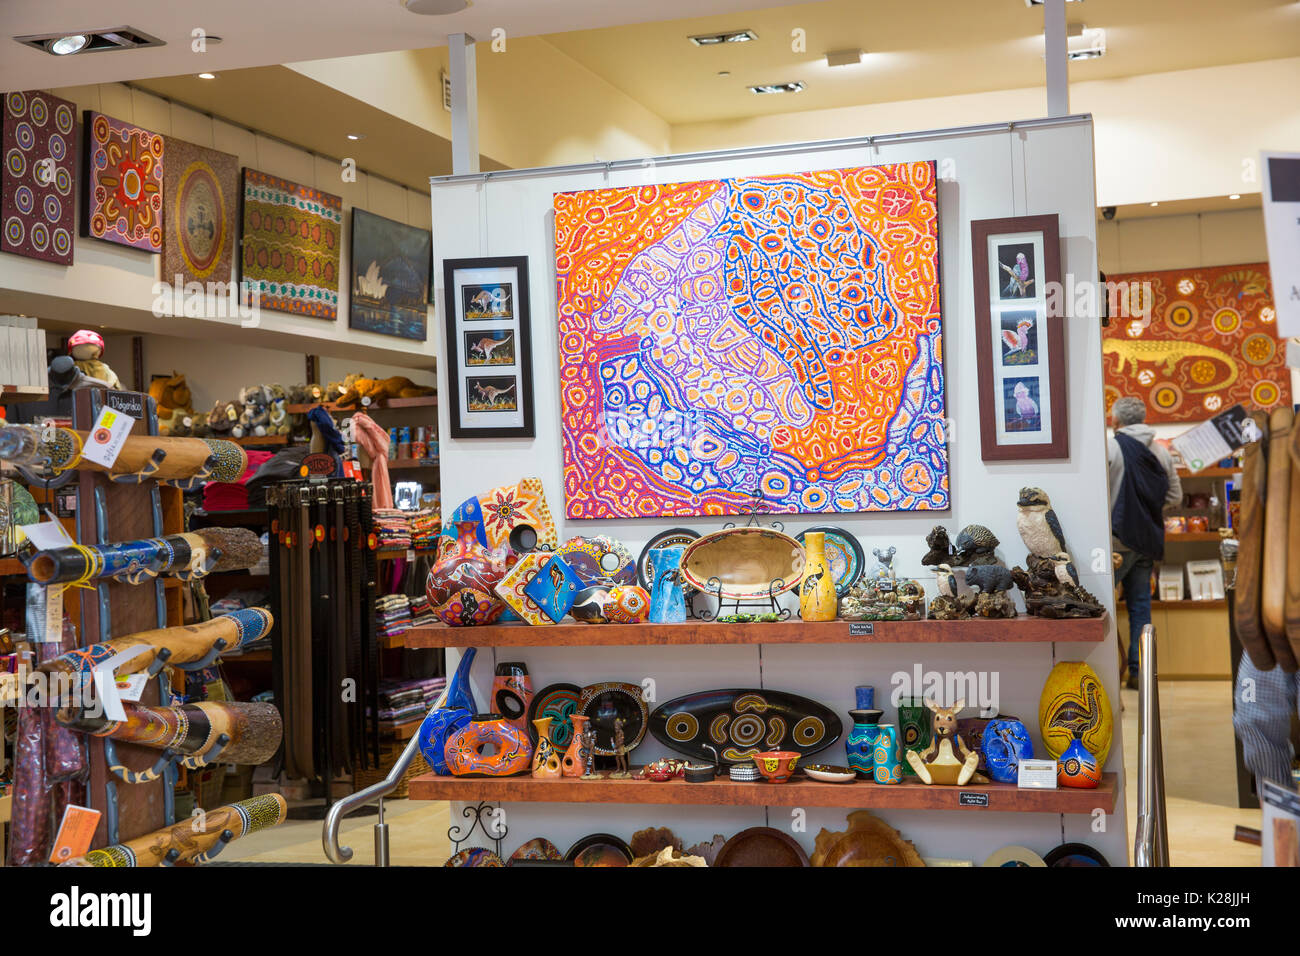 Souvenir shop in The Rocks area of Sydney selling gifts and aboriginal art to locals and tourists,Sydney,Australia Stock Photo